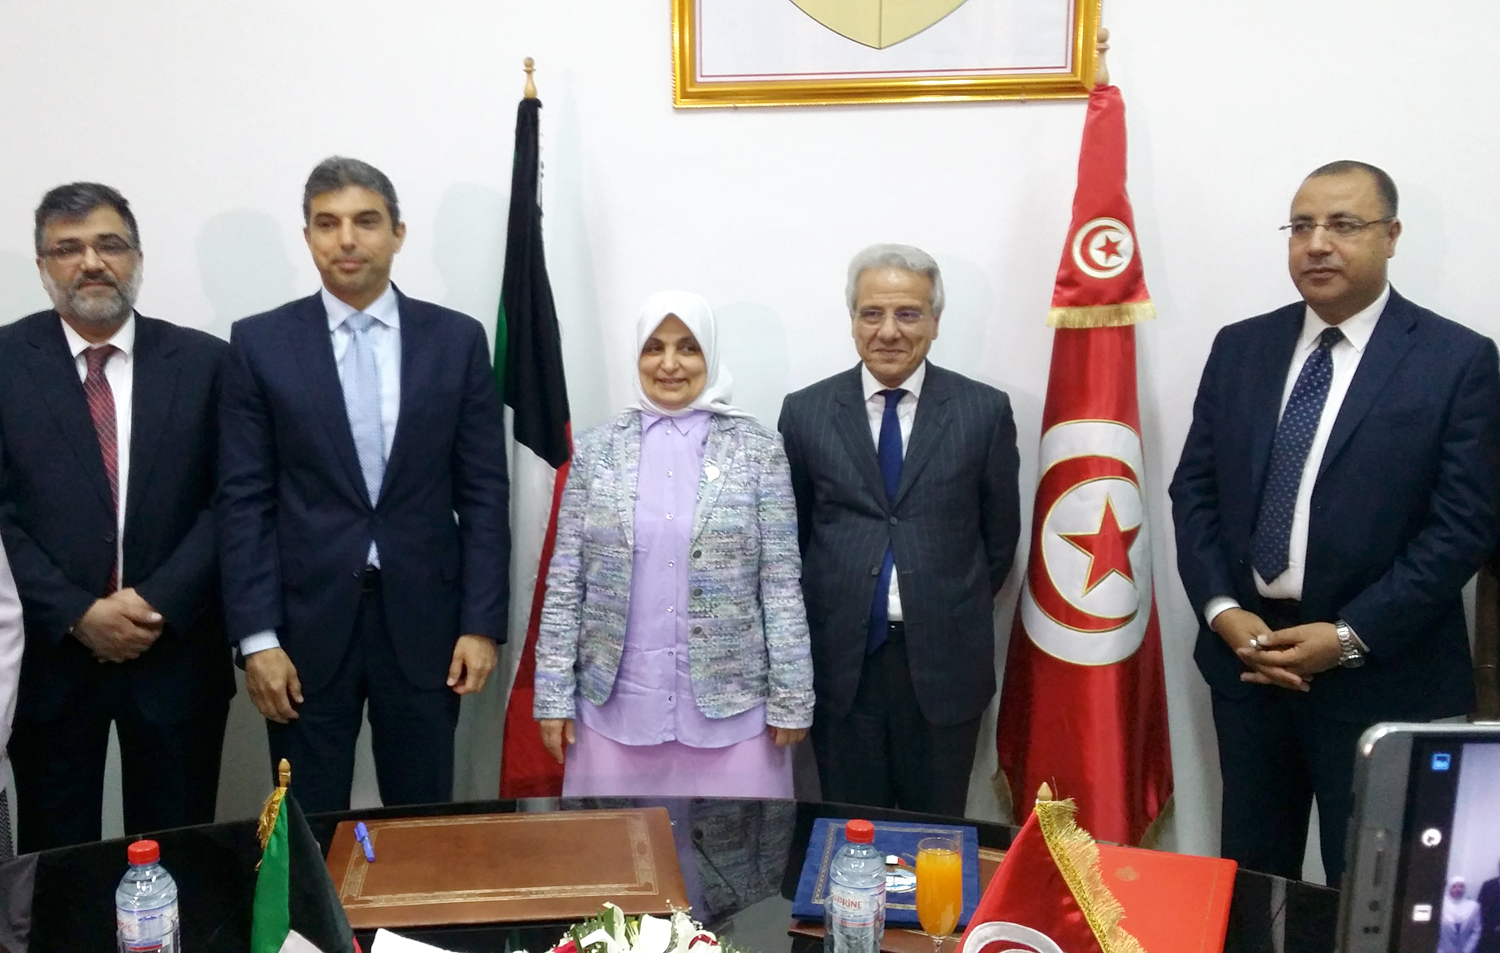 Minister of Social Affairs and Labor and Minister of State for Planning Affairs and Development Hind Al- Sabeeh with Tunisian counterpart Mahmoud bin Ramadan on the sidlines of signing ceremony